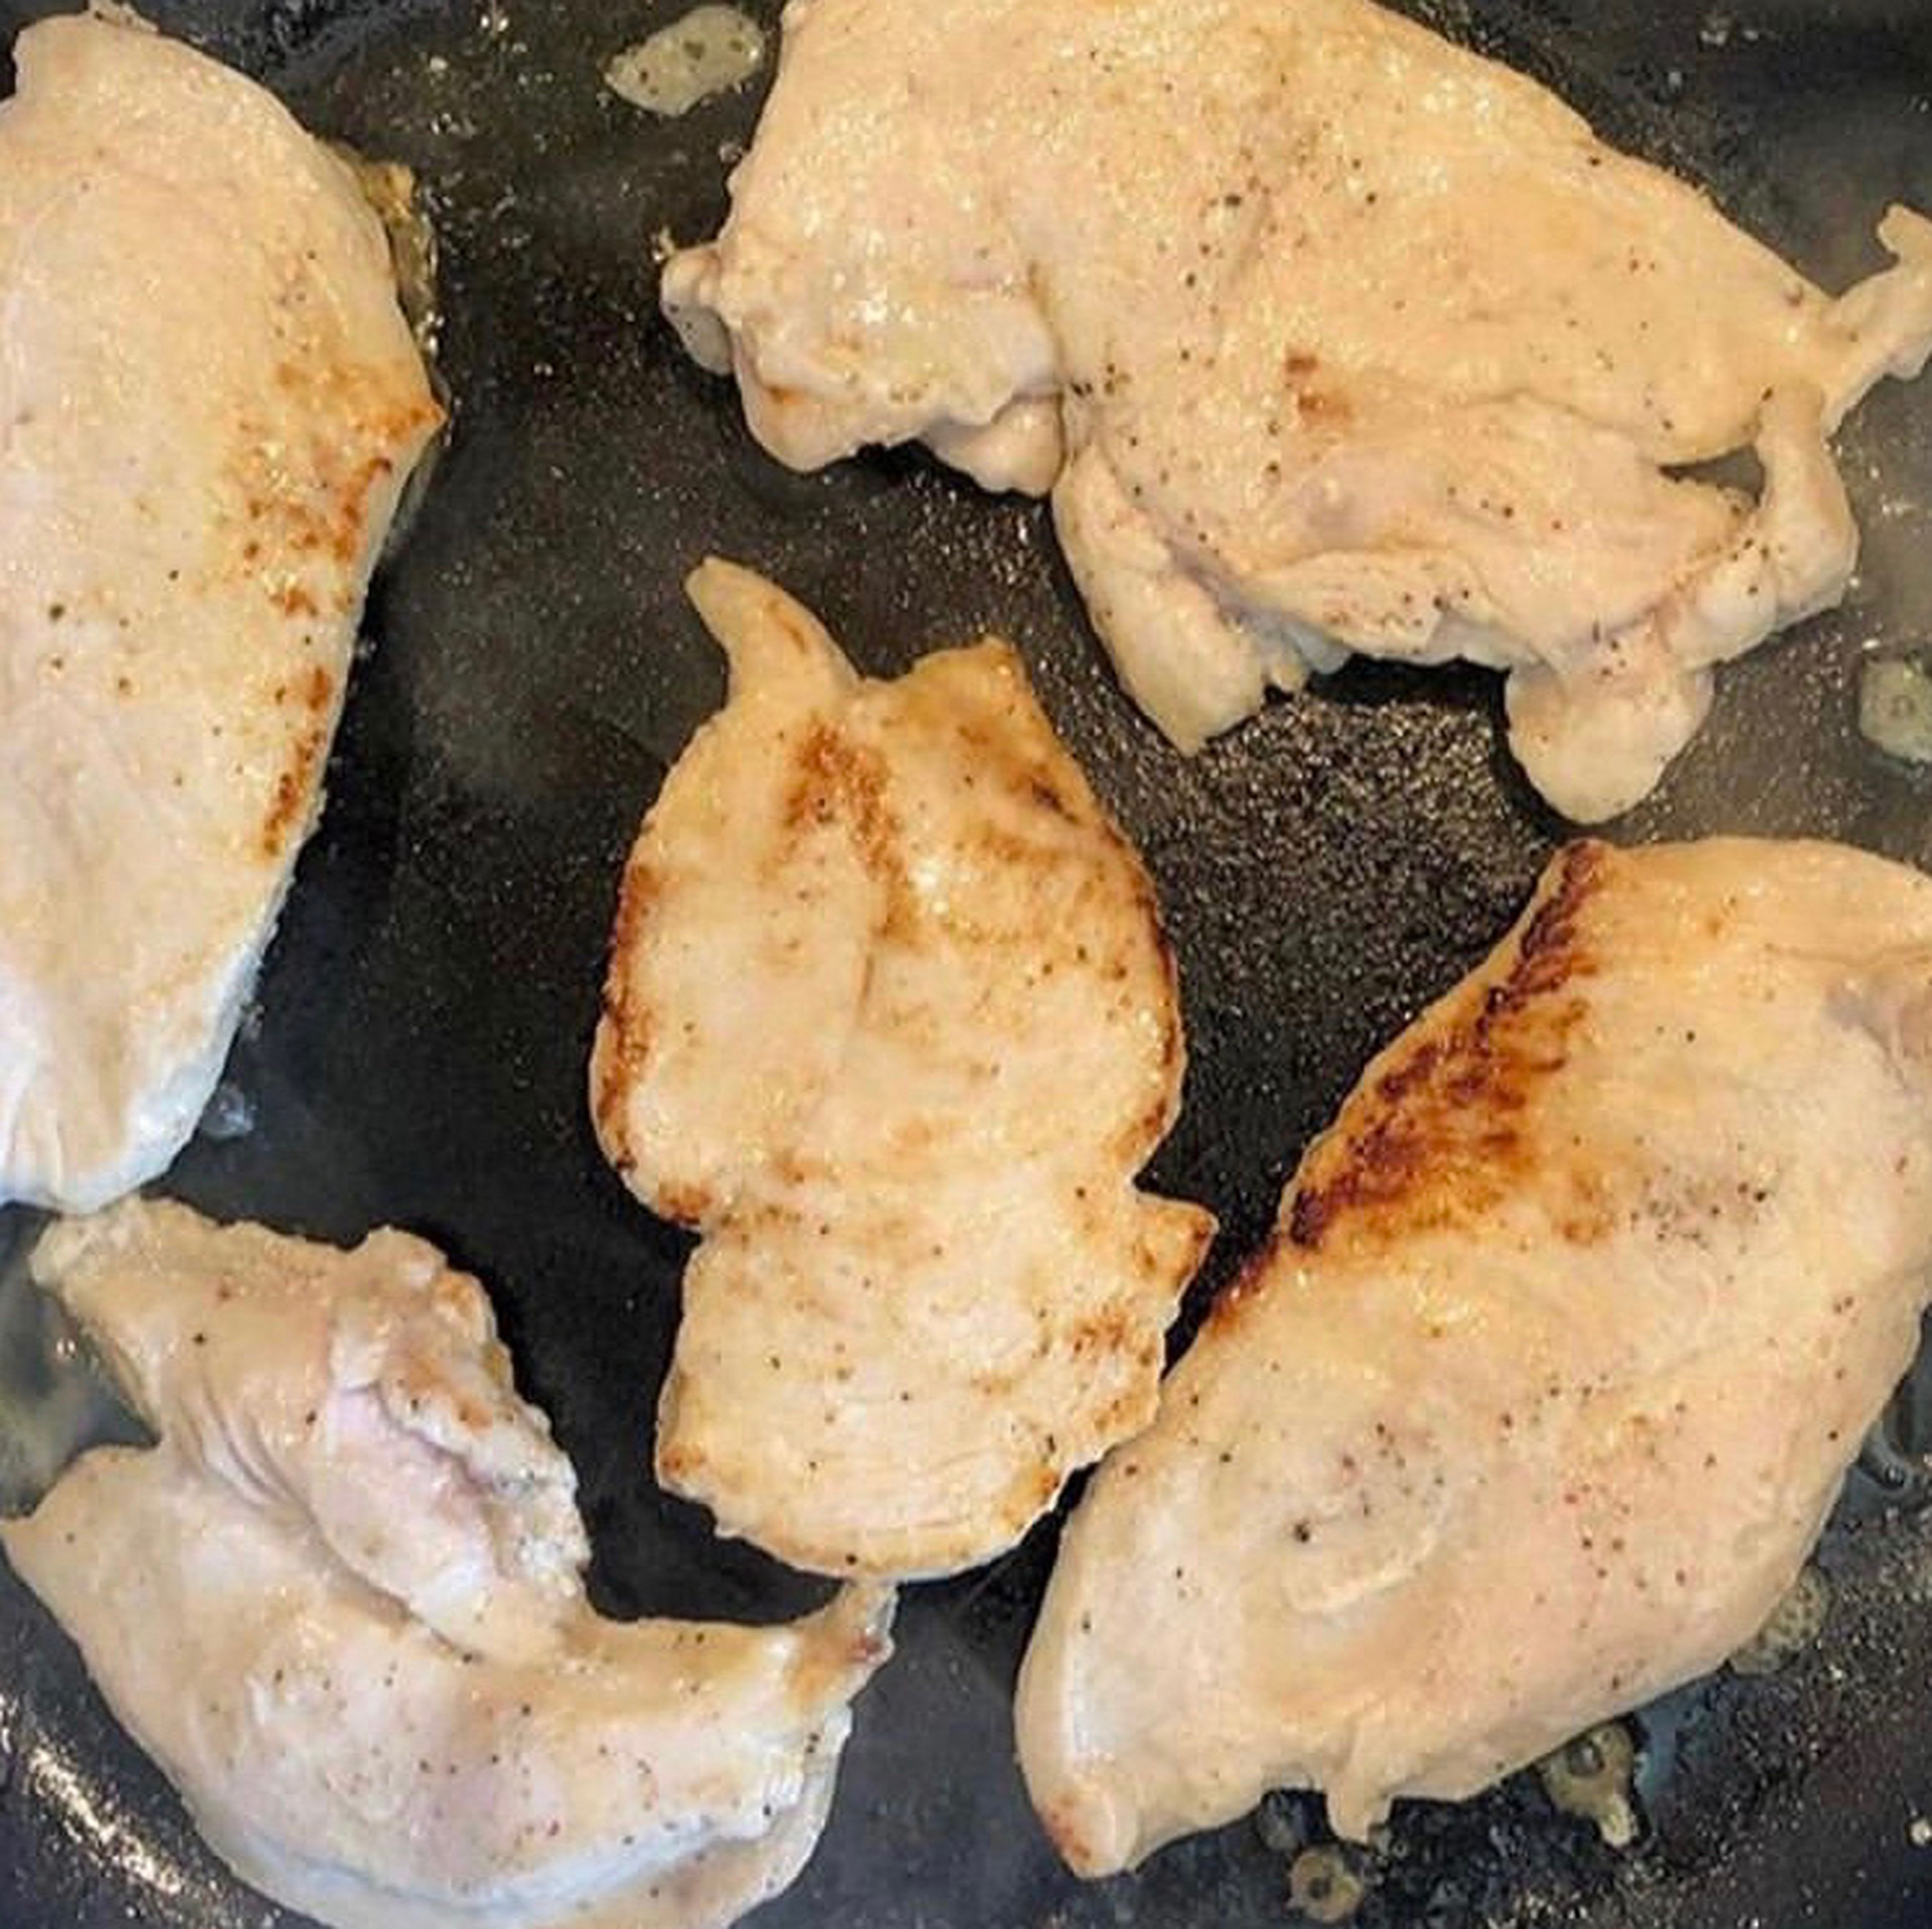 Make your chicken by adding it to a pan with oil. Make sure that the heat is set to medium-high. Cook your marinated chicken until it gets golden brown. When done, let your chicken rest for 10 min.